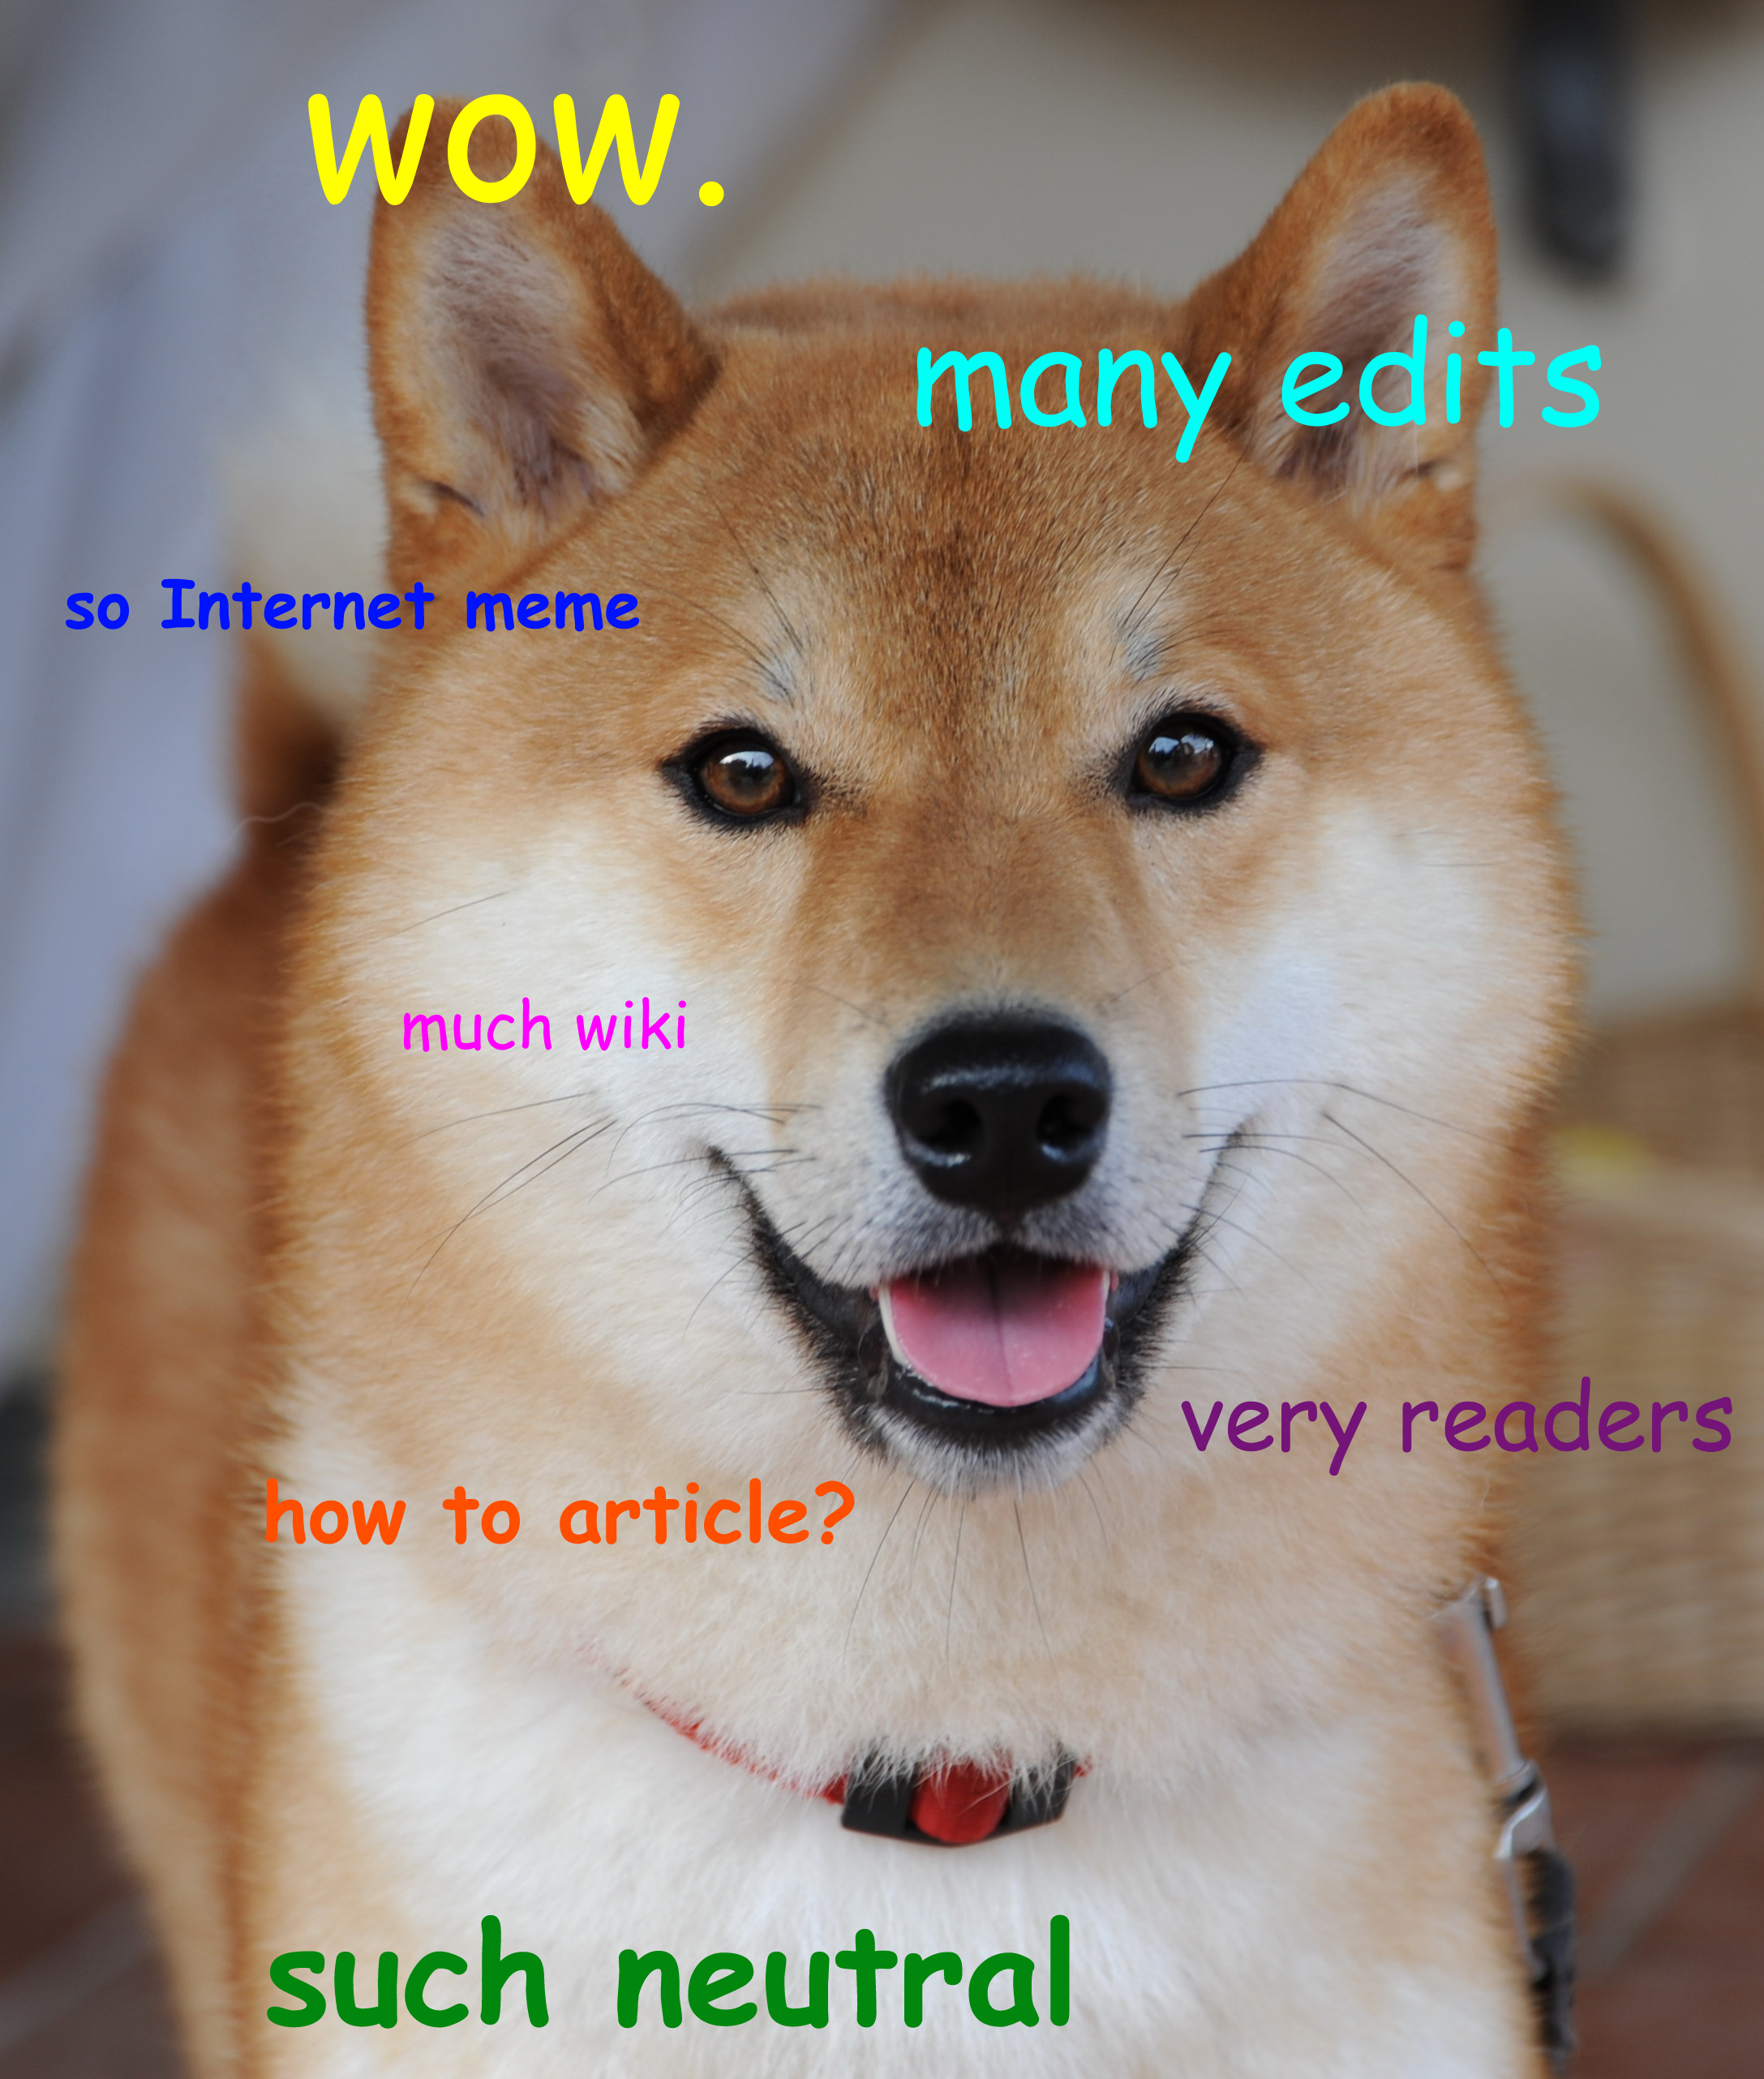 Meet the Real Dog Behind the Doge Meme | The BarkPost